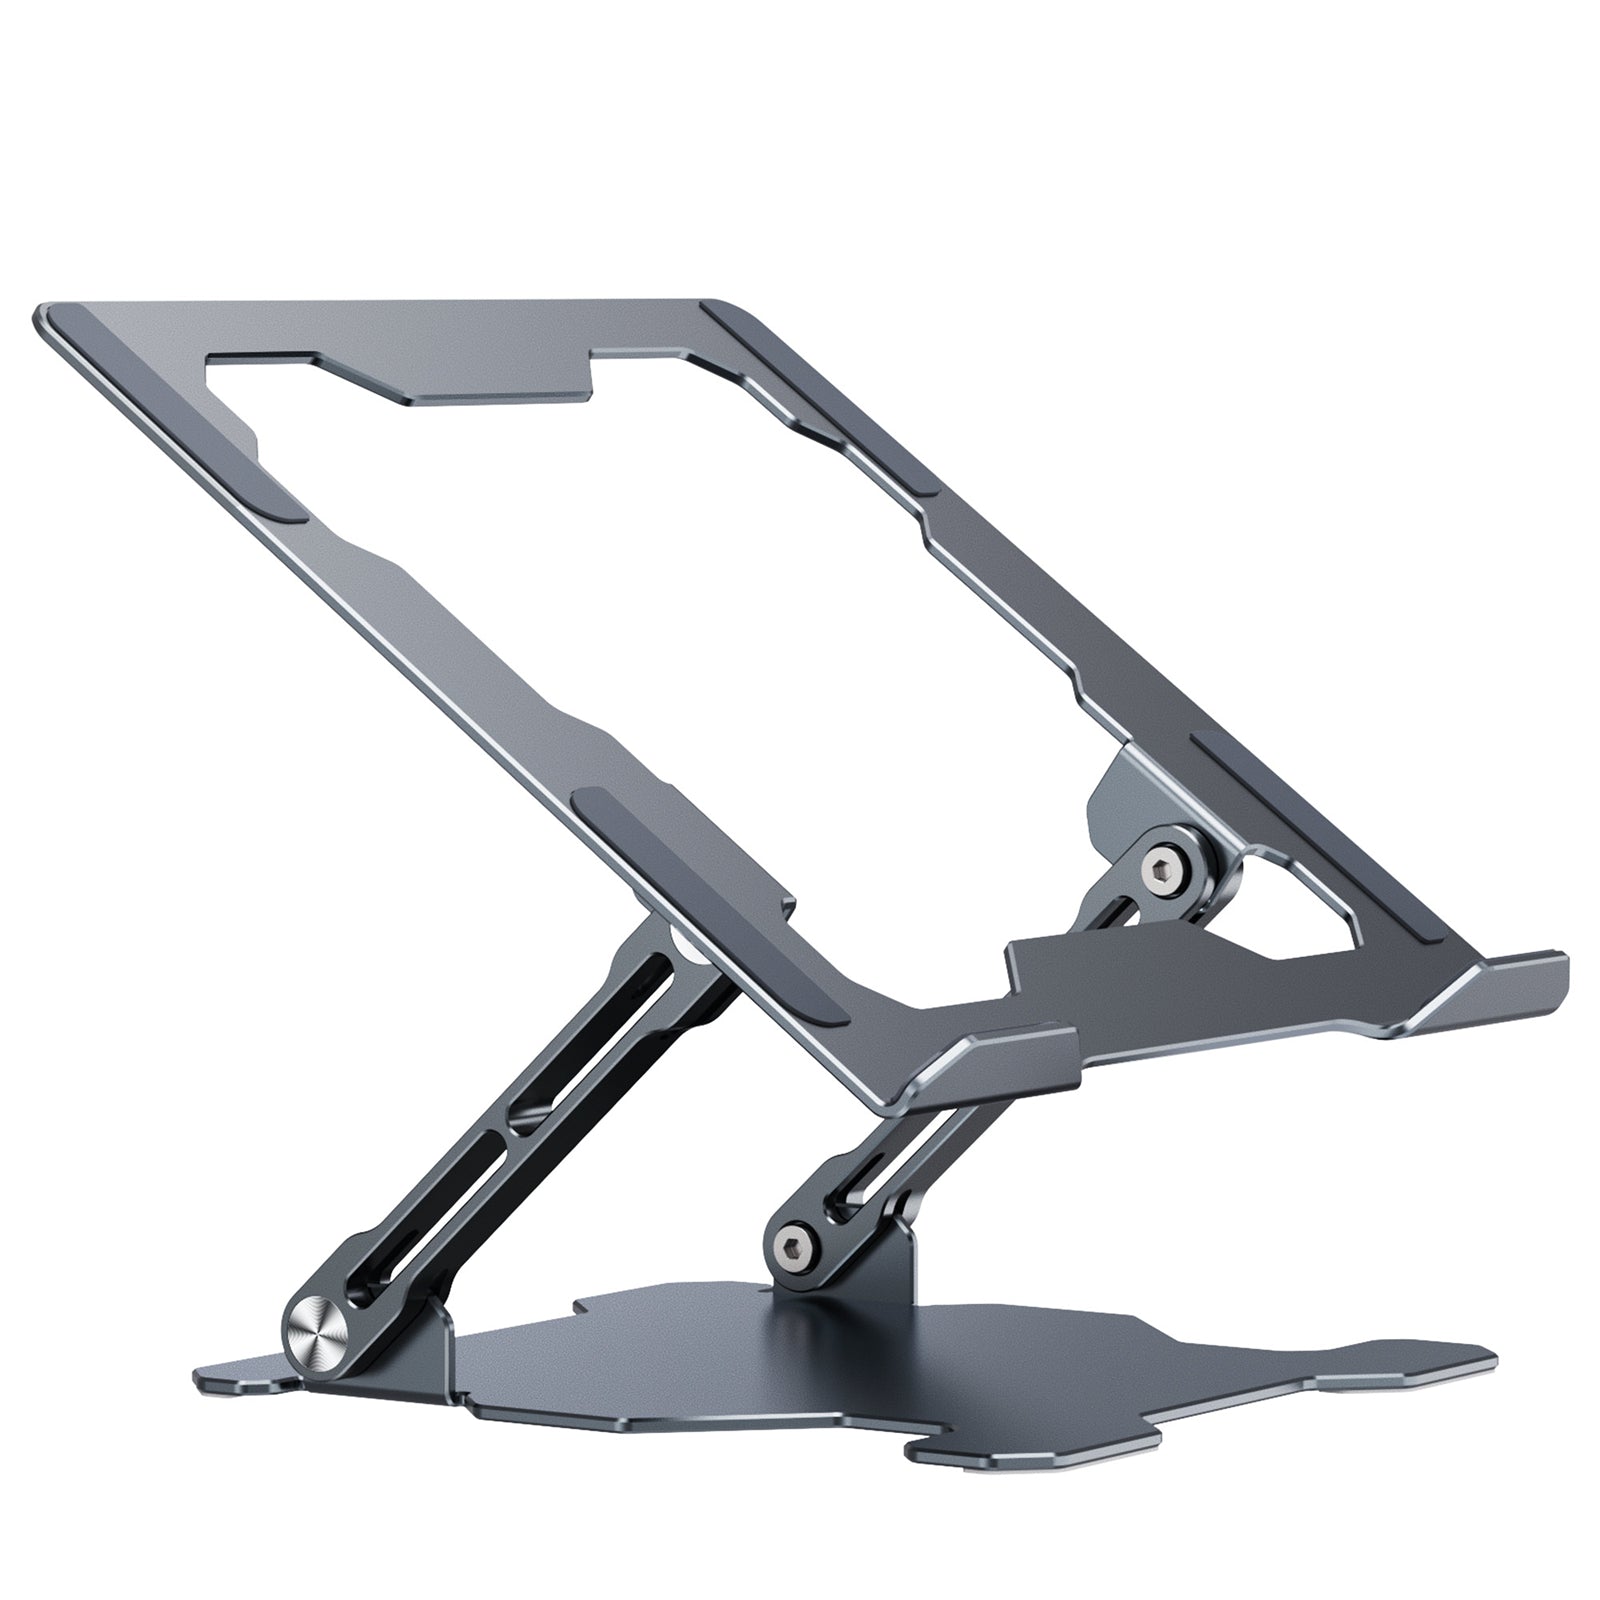 Does a Laptop Stand Improve Airflow?